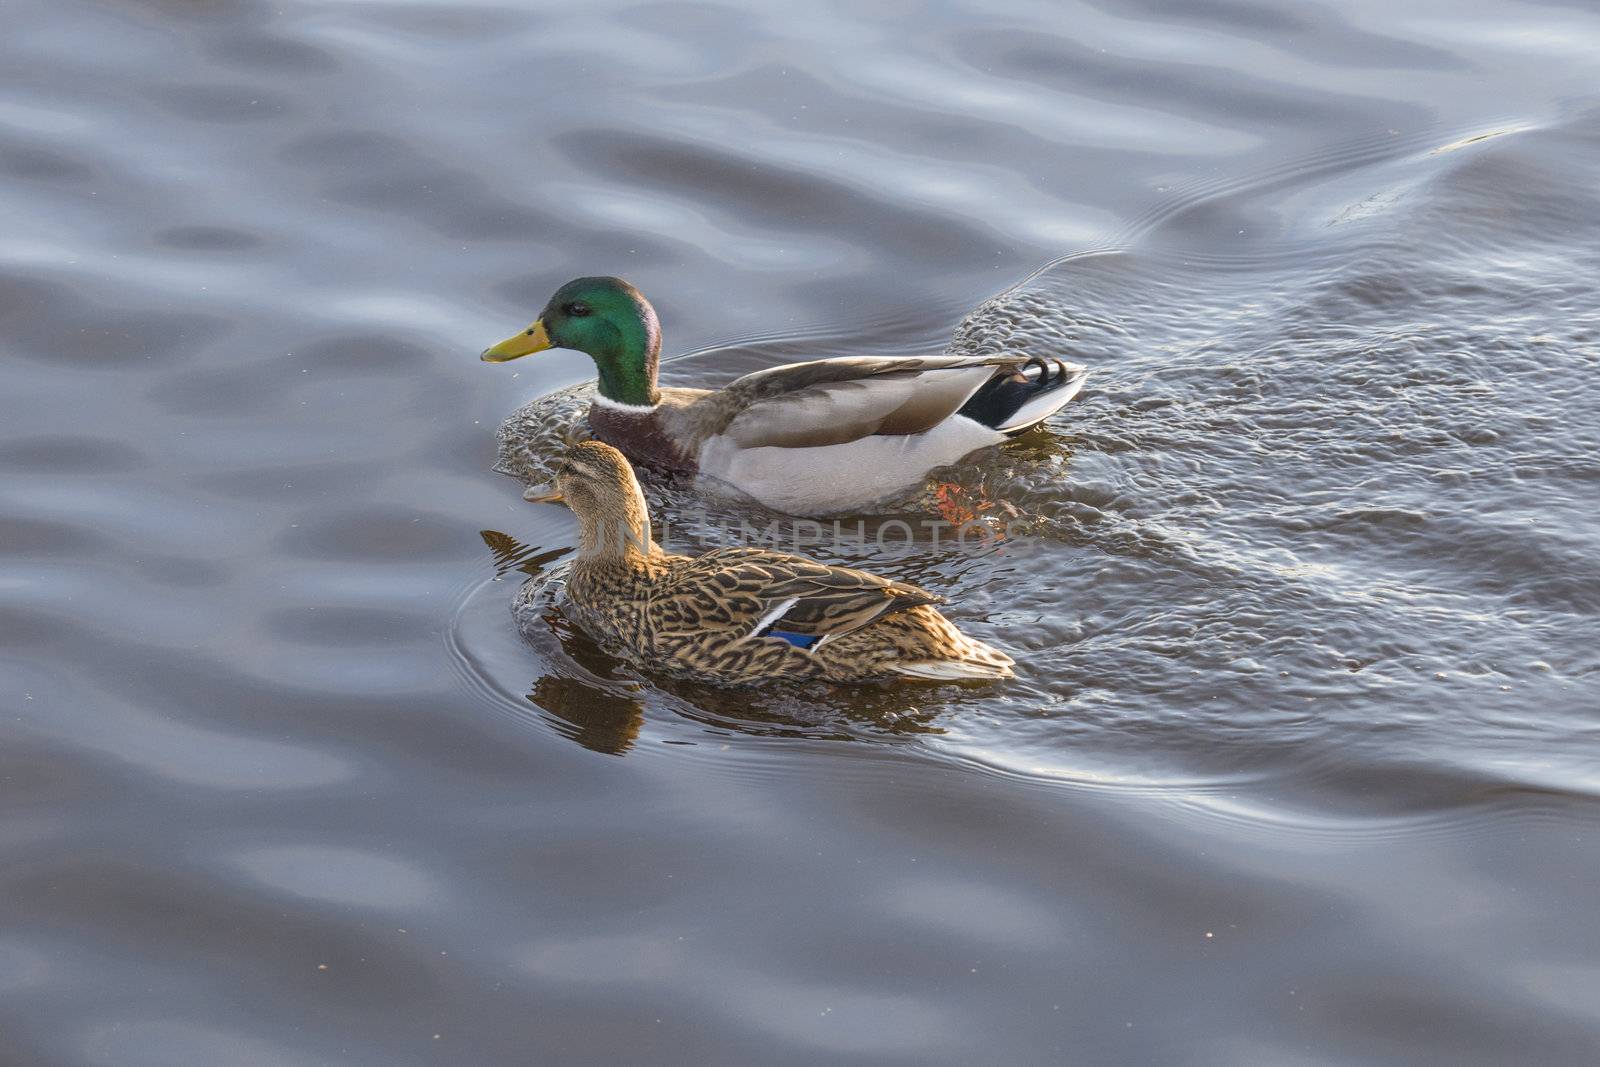 in the tista river in halden there is a rich bird life, most of all, it mallards (anas platyrhynchos) (picture) but there are also some common goldeneye (bucephala clangula) and a number of different seabirds, the image is shot one march day in 2013.